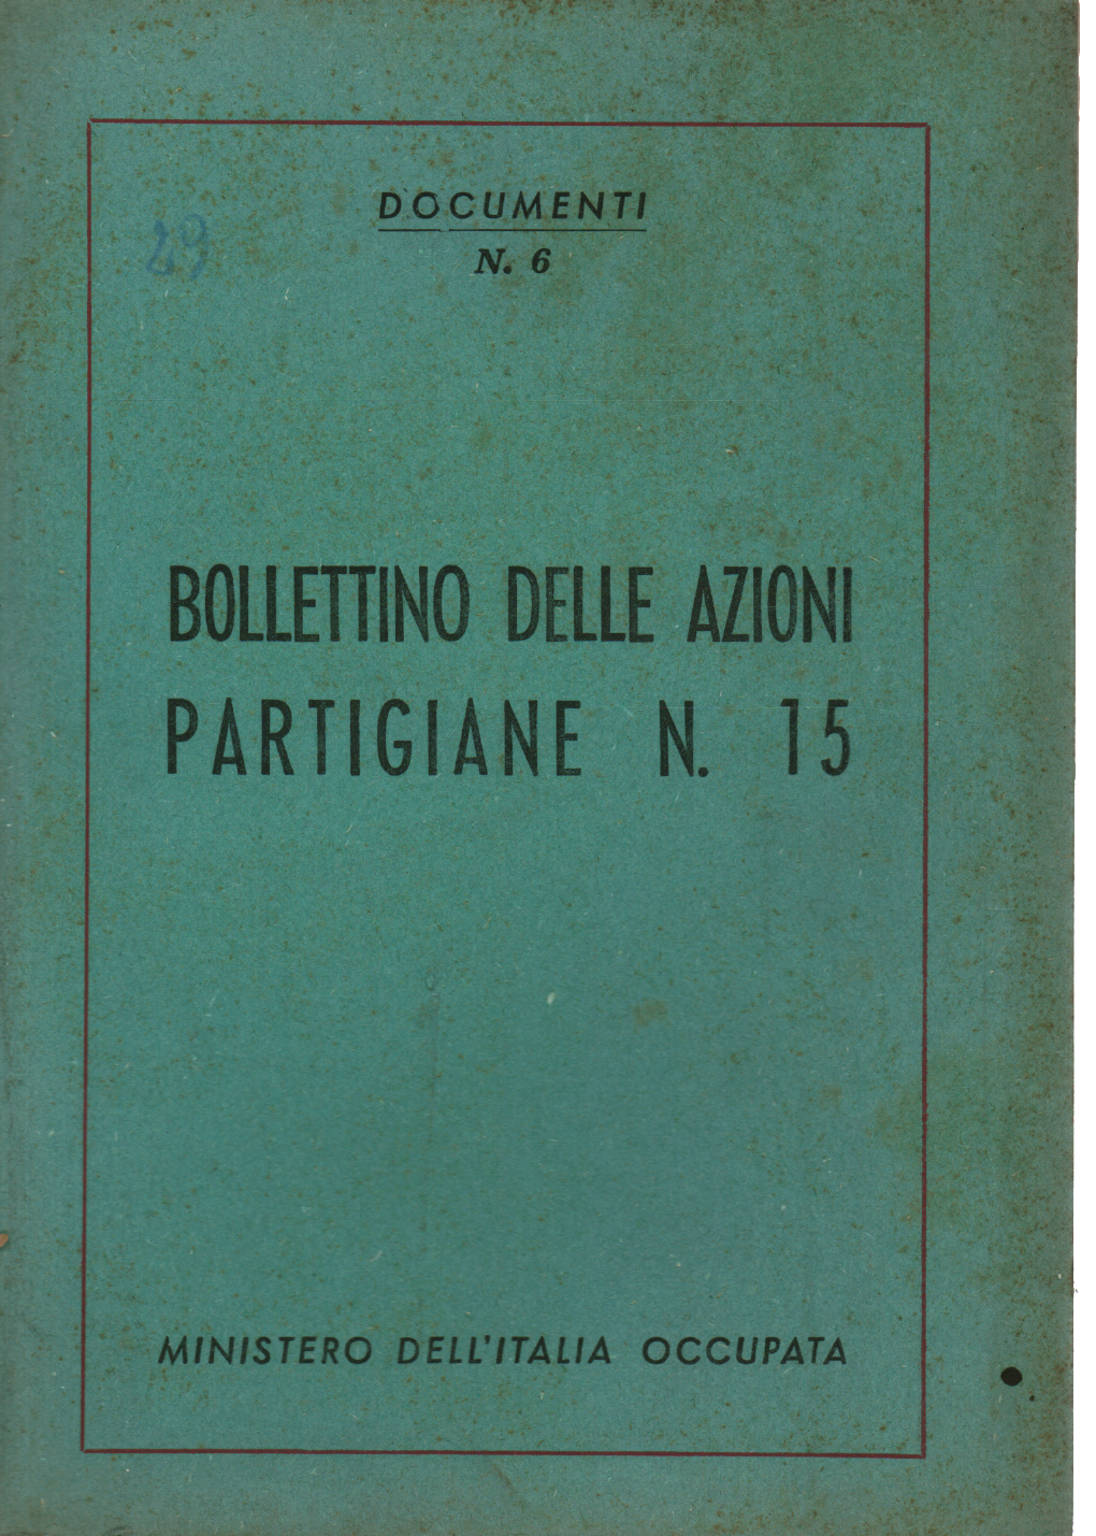 Bulletin of partisan actions n. 15, AA.VV.